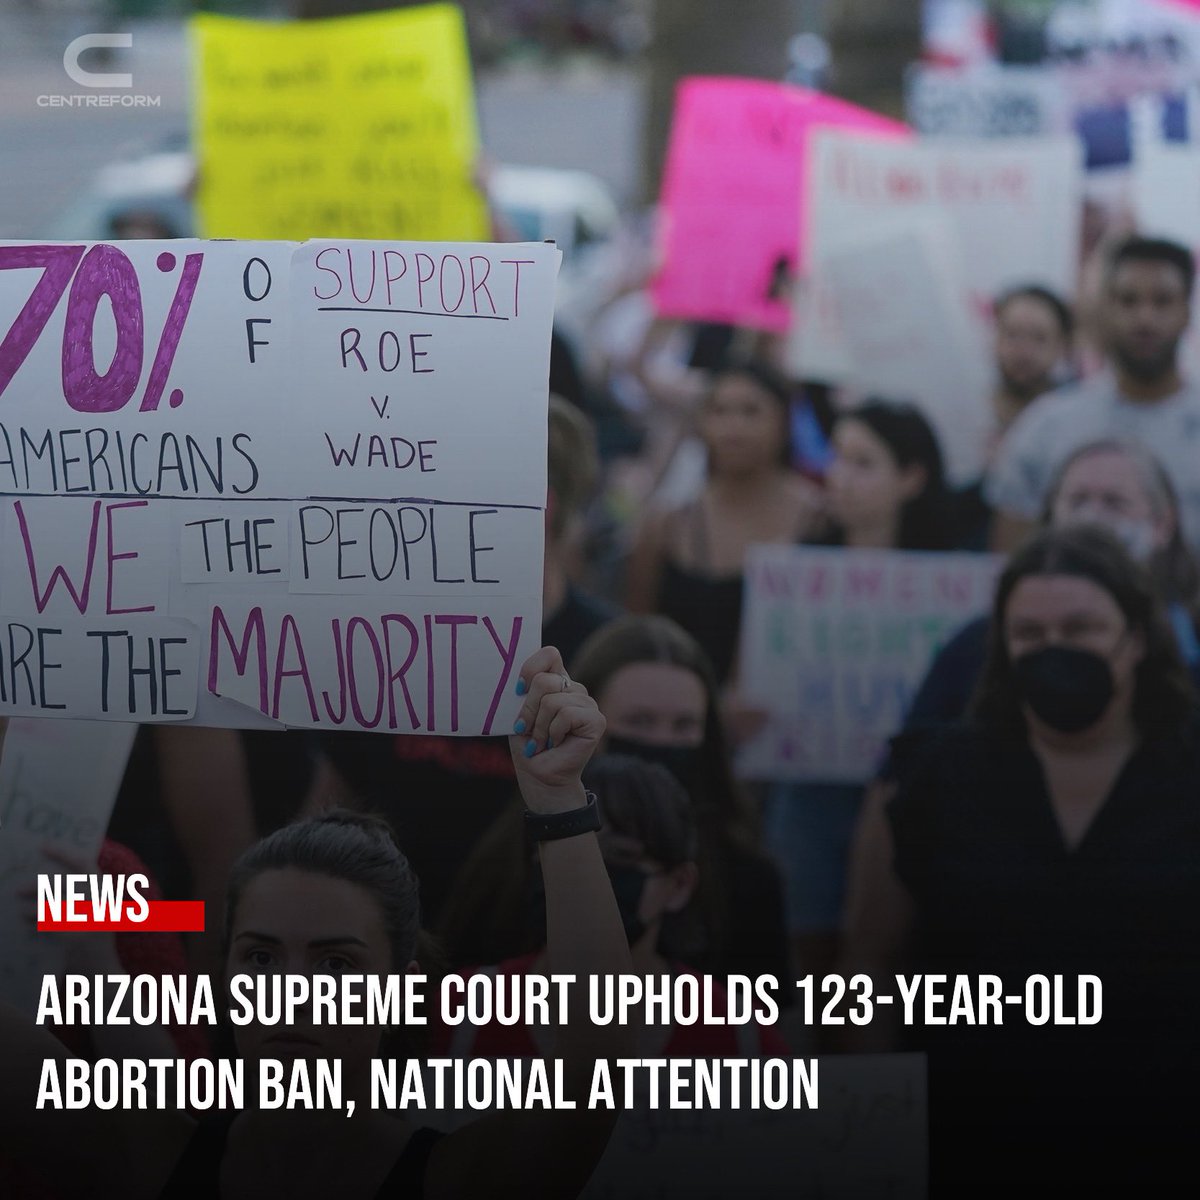 In a landmark decision, the Arizona Supreme Court upheld a 123-year-old law that severely restricts abortion, allowing the procedure only when necessary to save the pregnant person's life. The ruling, which imposes criminal sanctions on abortion providers, places Arizona among